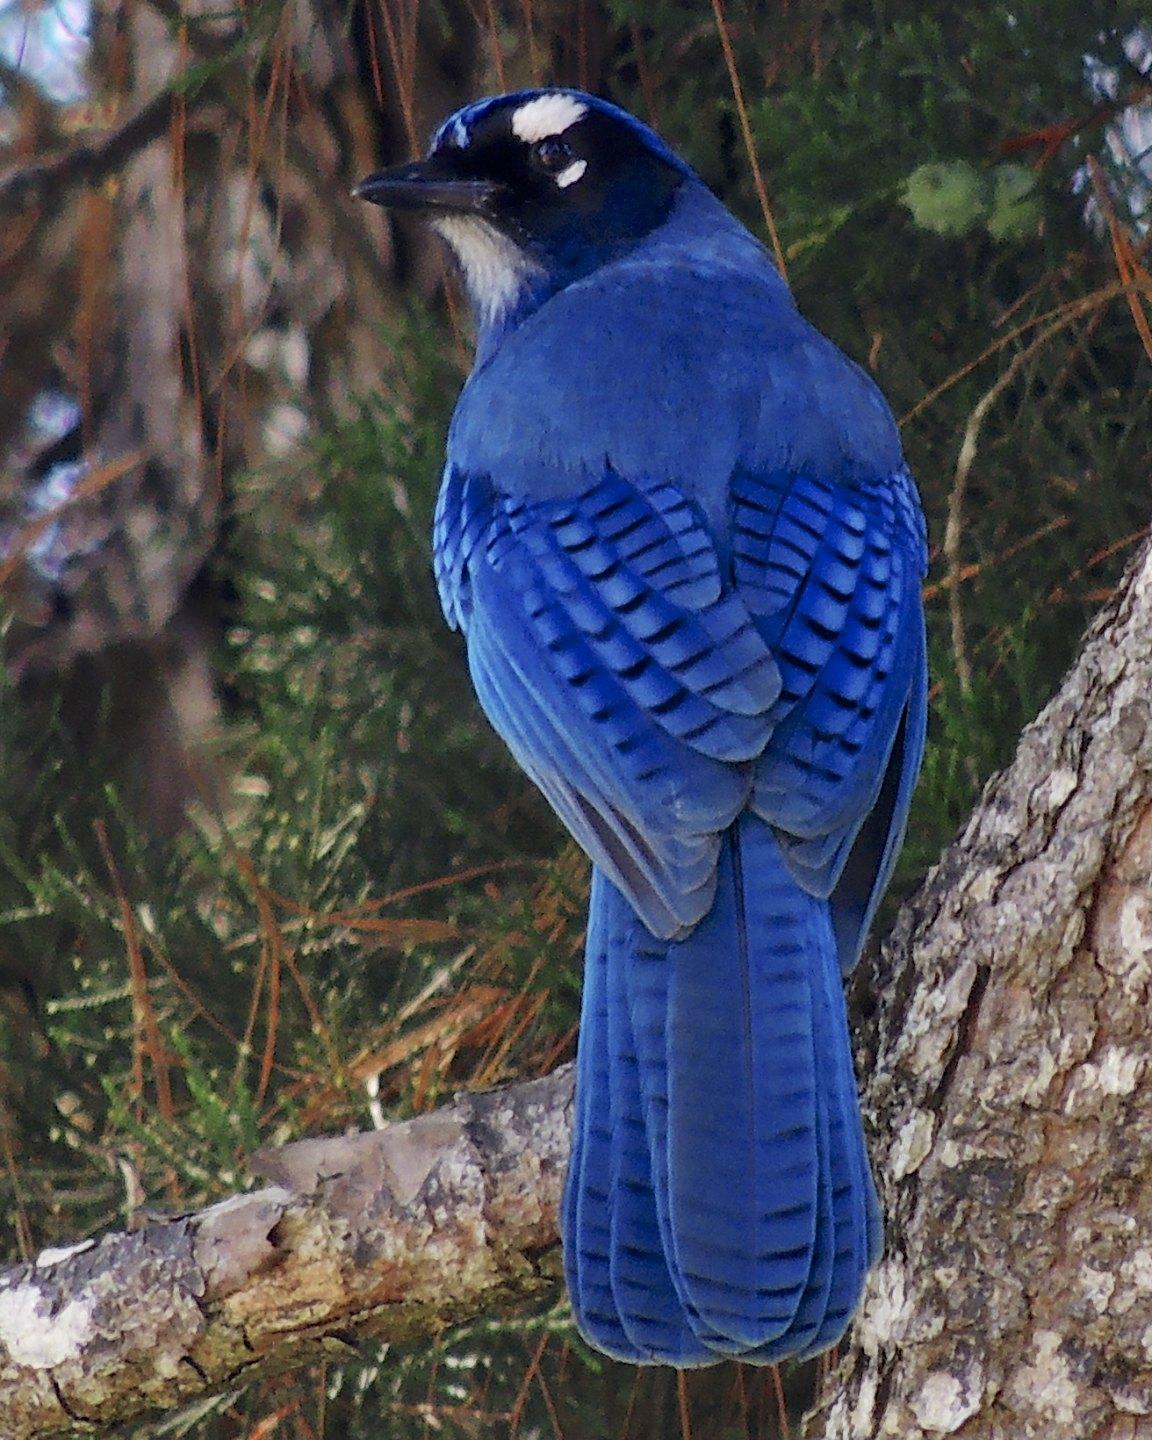 Steller's Jay (Central American) Photo by Andres Duarte